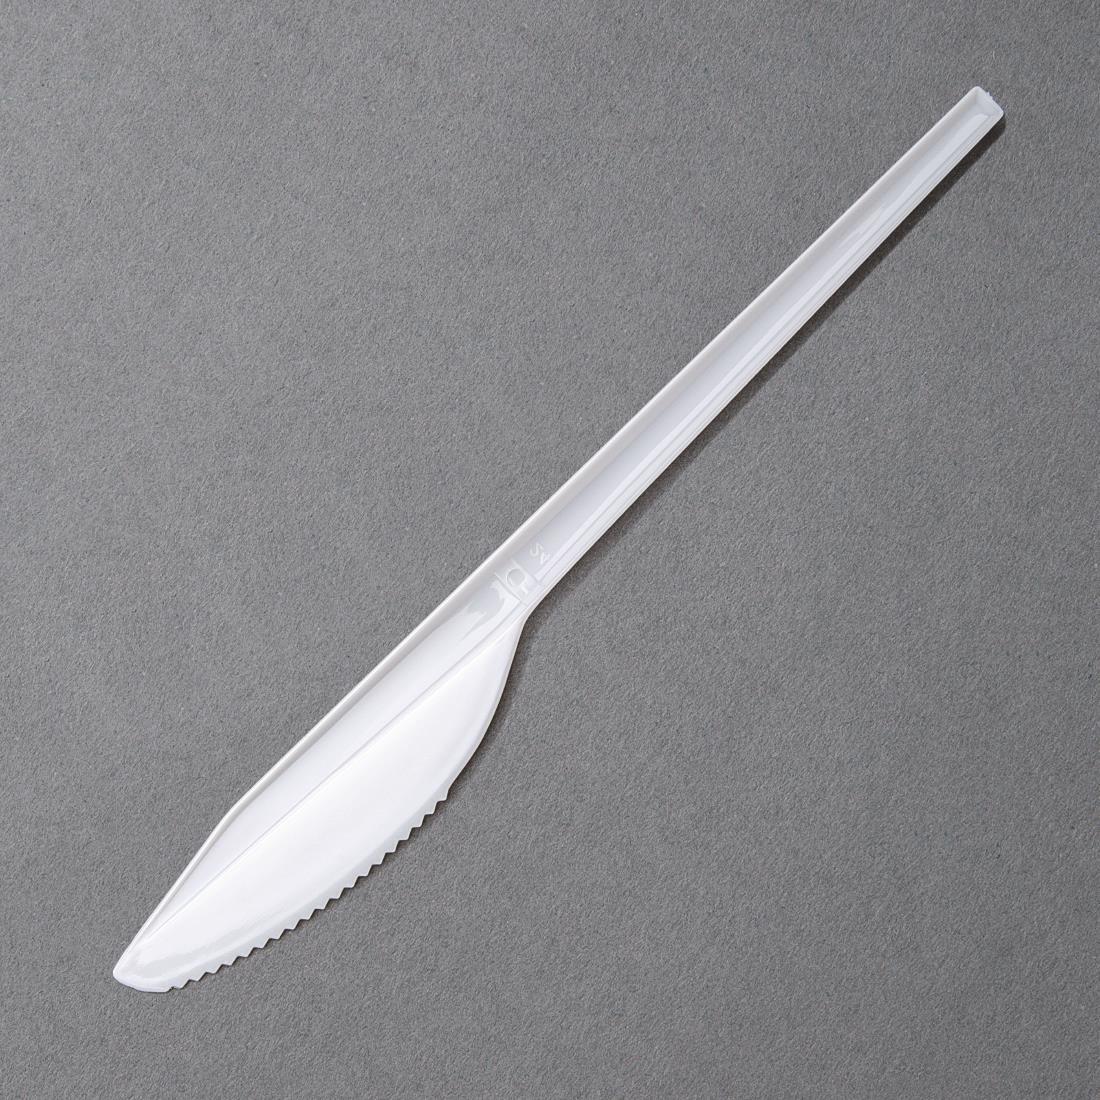 Fiesta Recyclable Plastic Knives White (Pack of 100) - U642  - 4